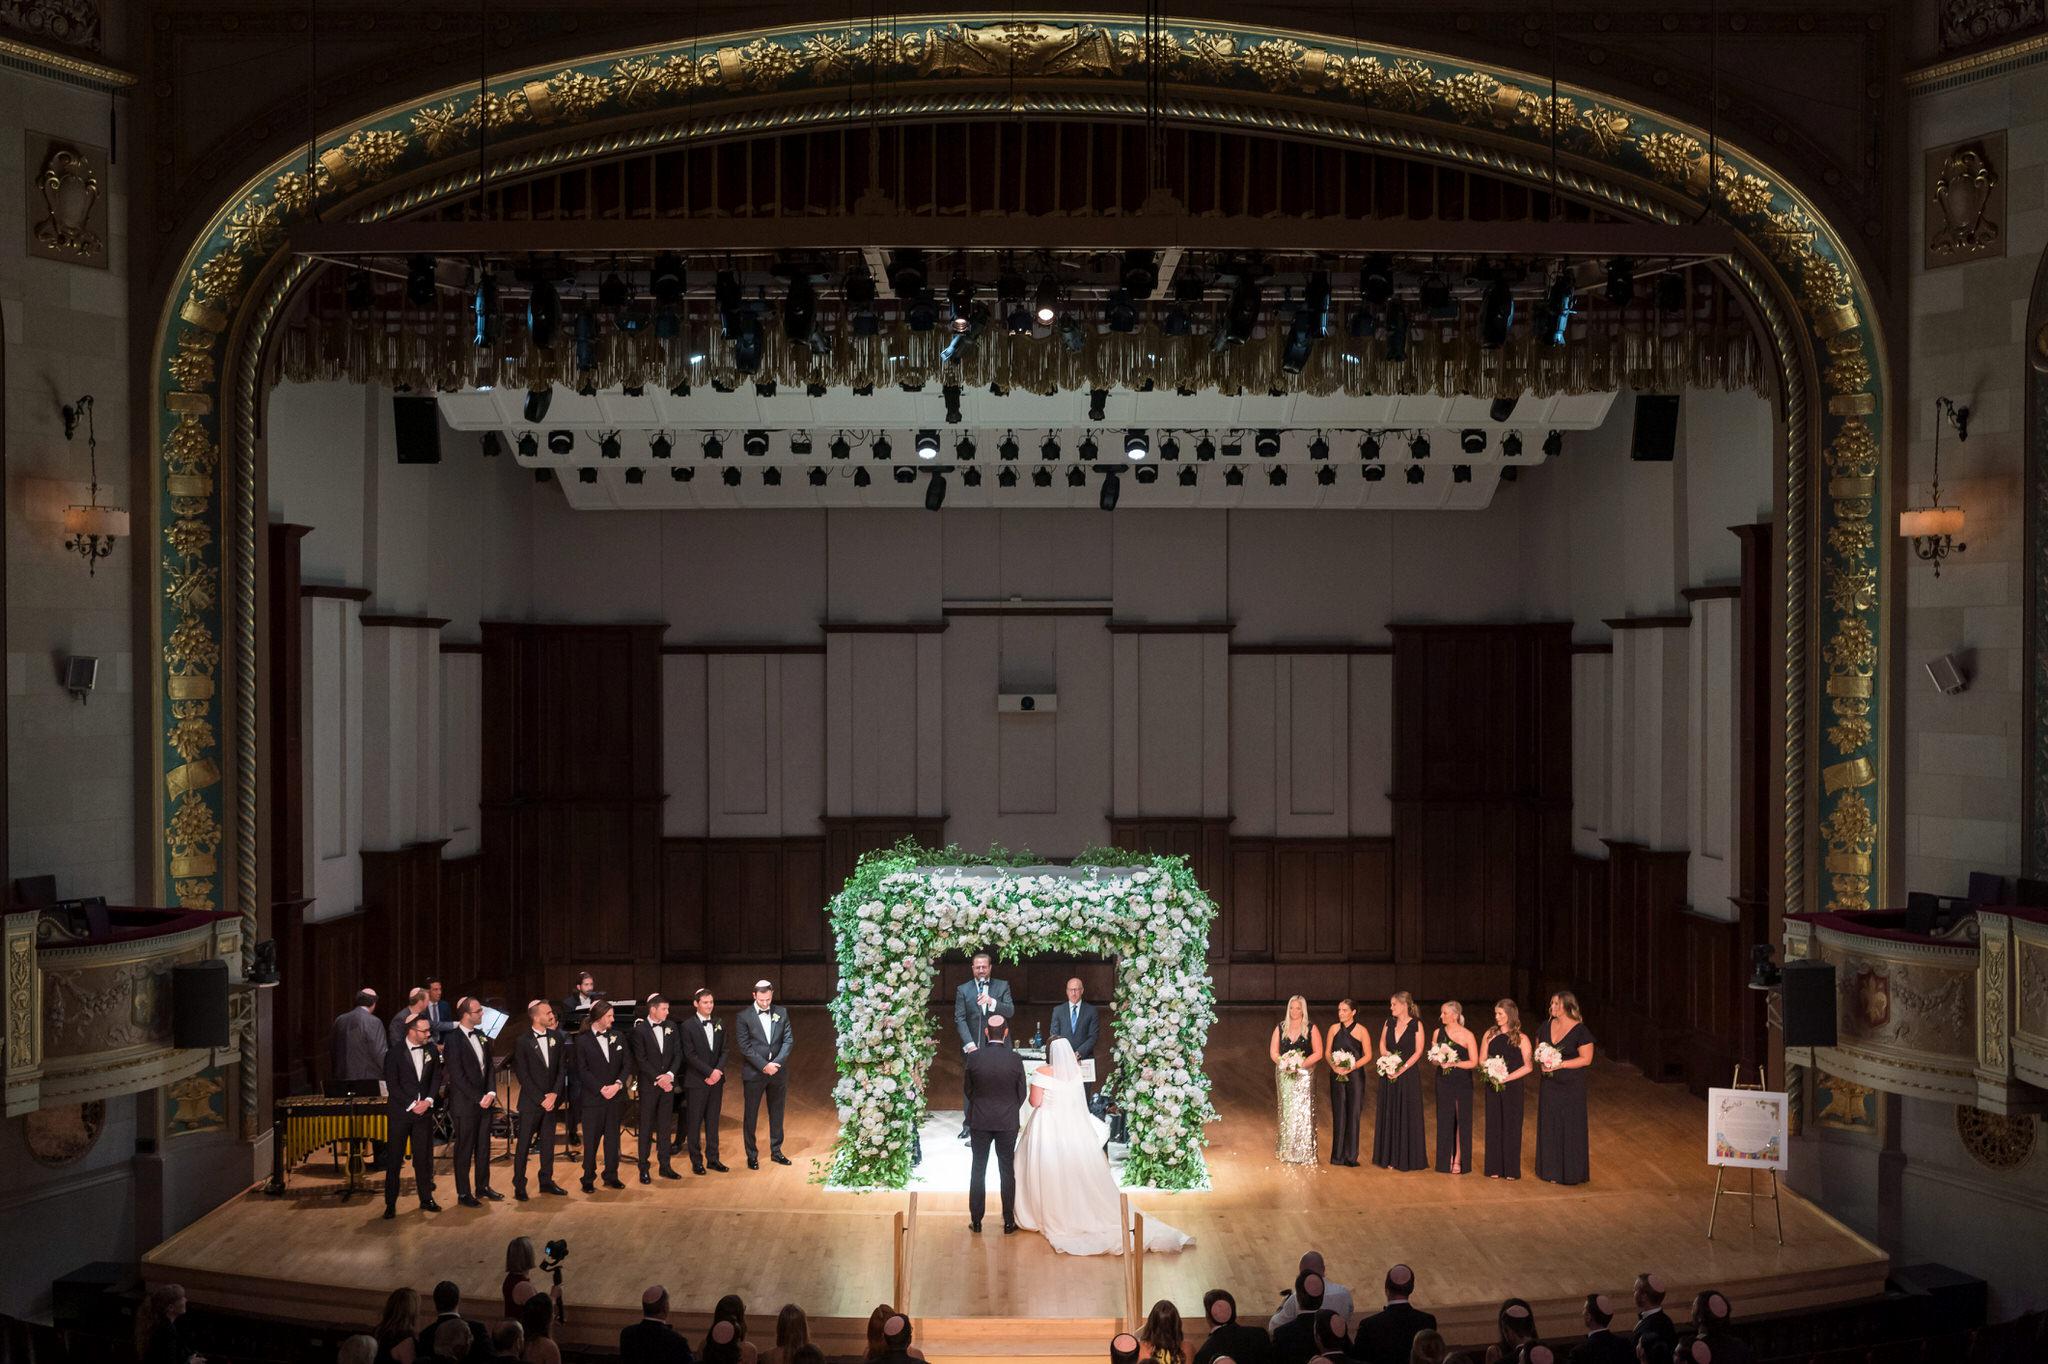 A bride and groom stand beneath an floral chuppah on stage at a Detroit Orchestra Hall wedding.  